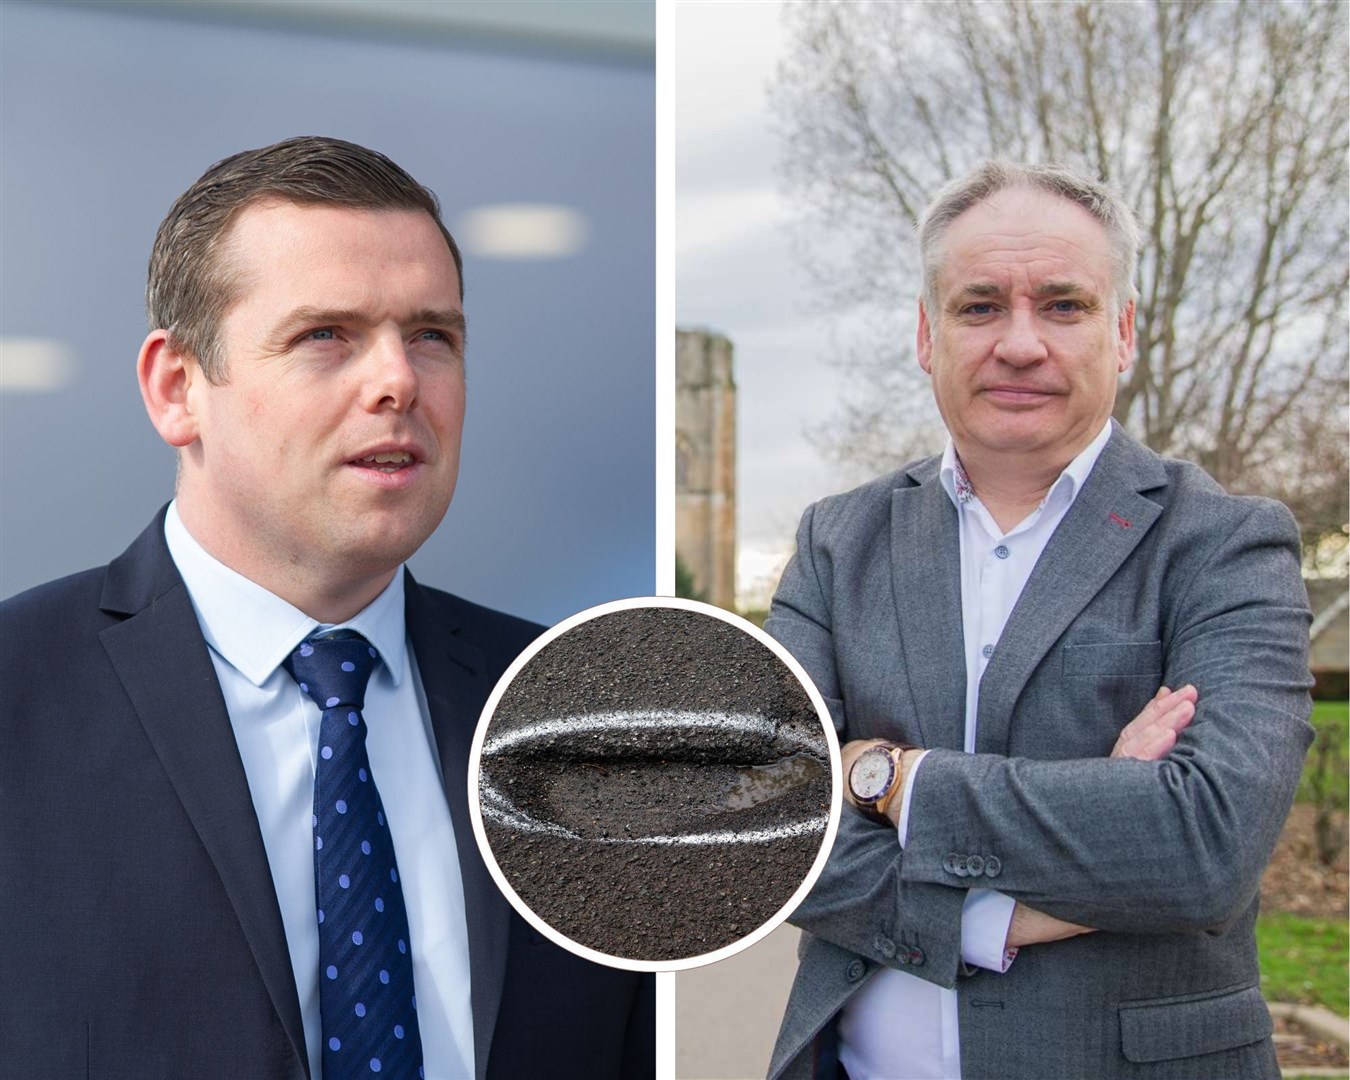 Moray MP Douglas Ross and Moray MSP Richard Lochhead have clashed over what is to blame for an increase in pothole repair costs in the region.